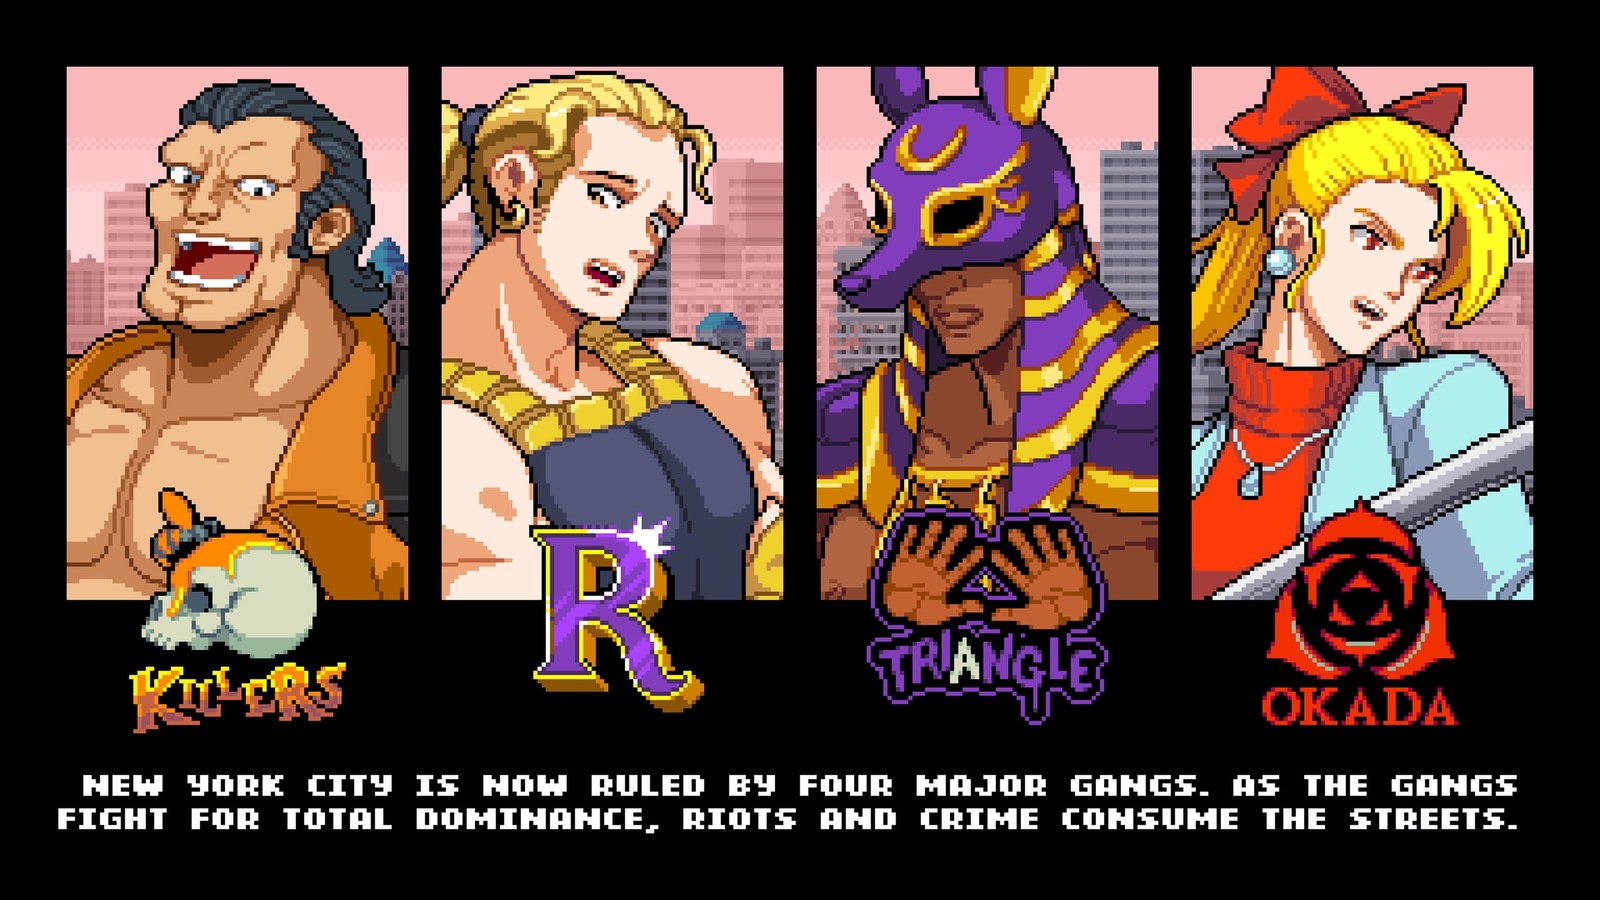 Double Dragon Gaiden: Rise of the Dragons Game Review